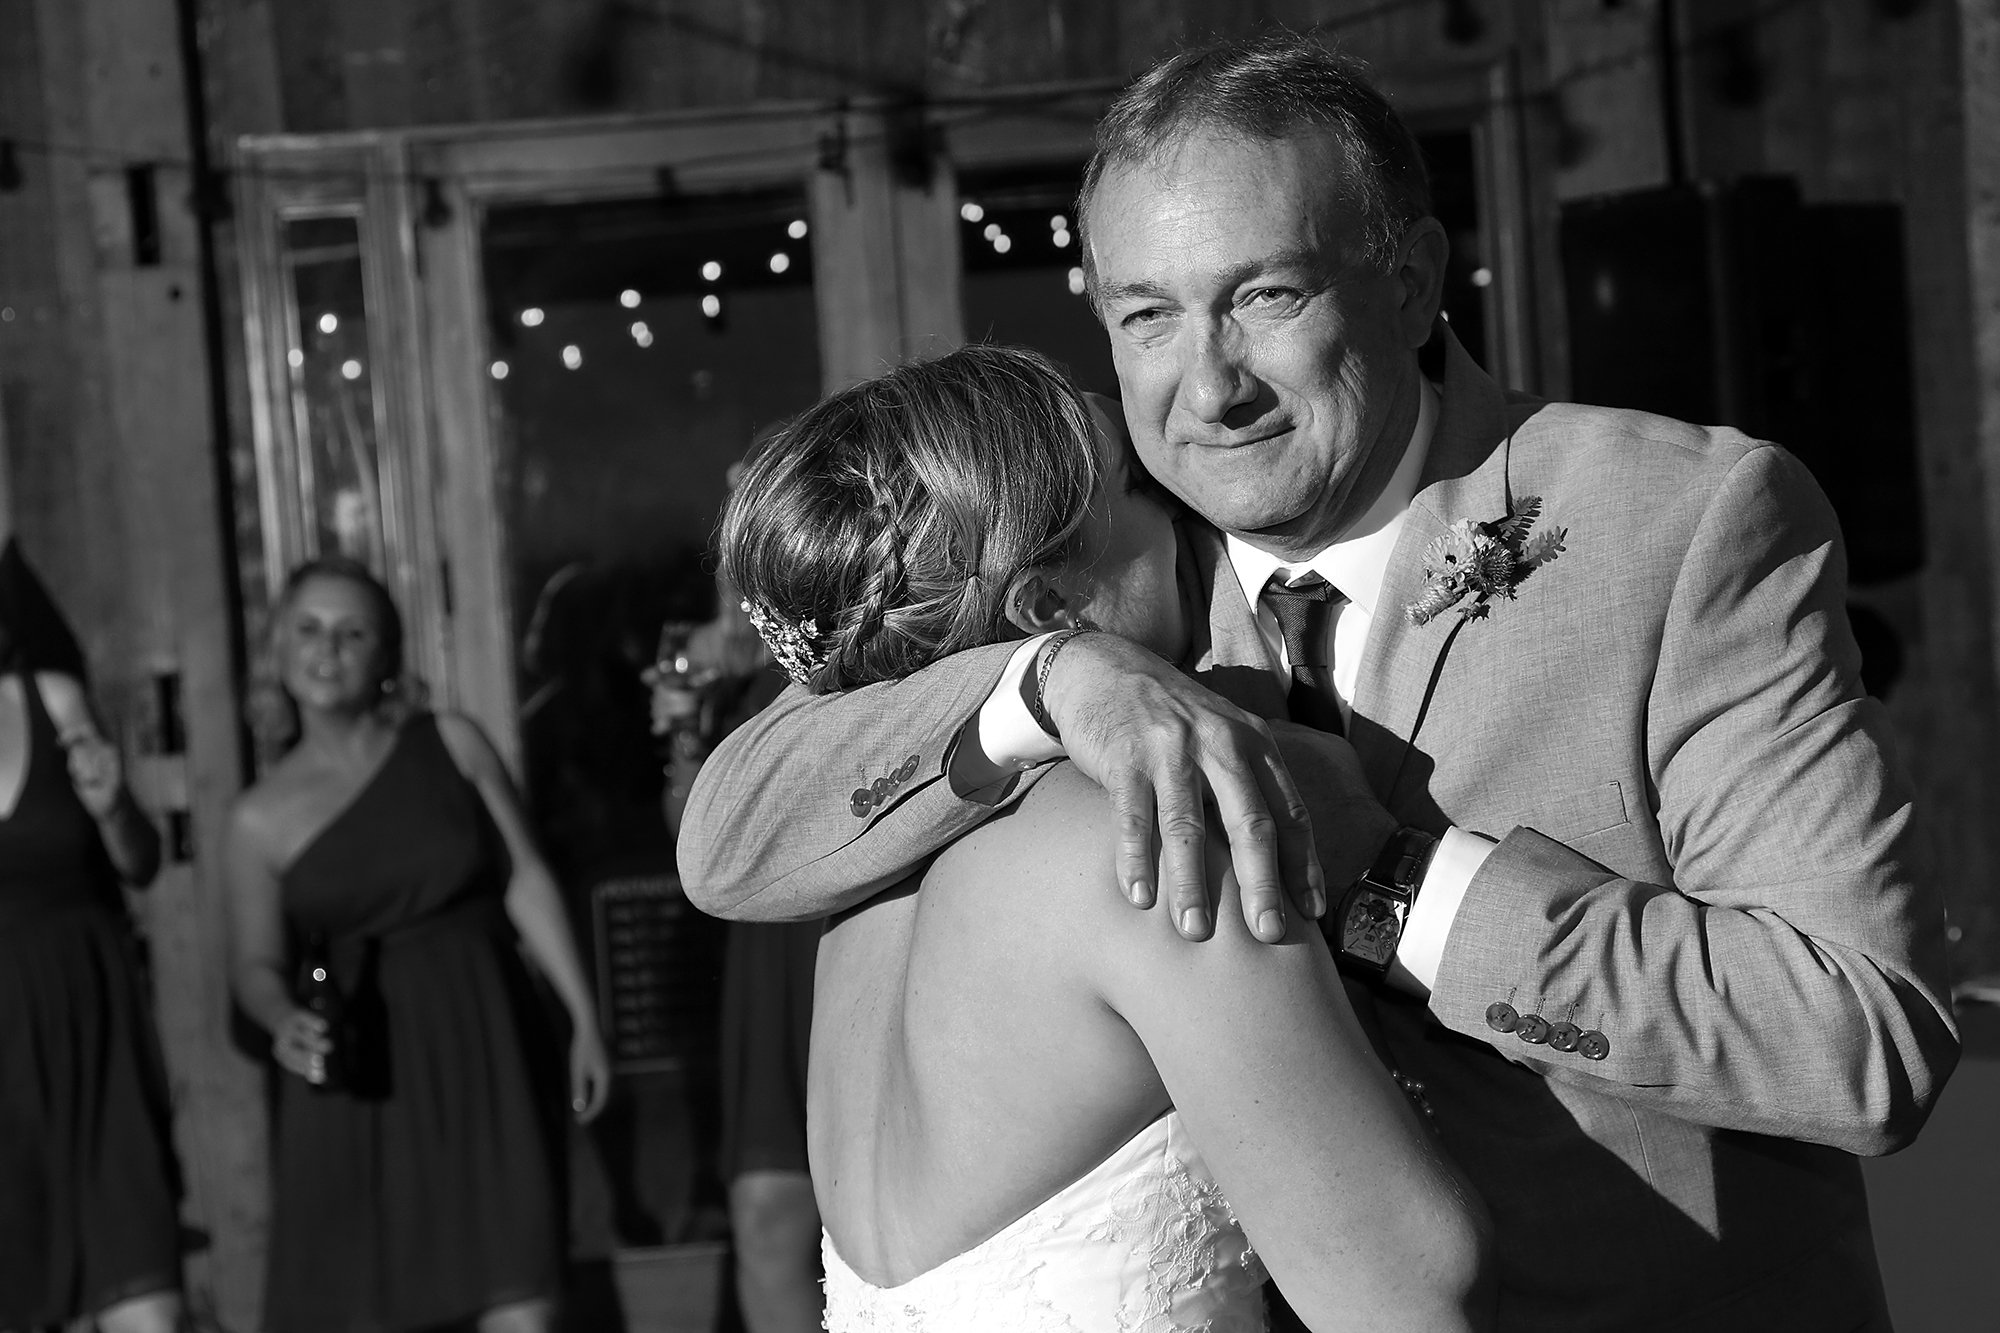 Father embraces daughter at wedding reception.